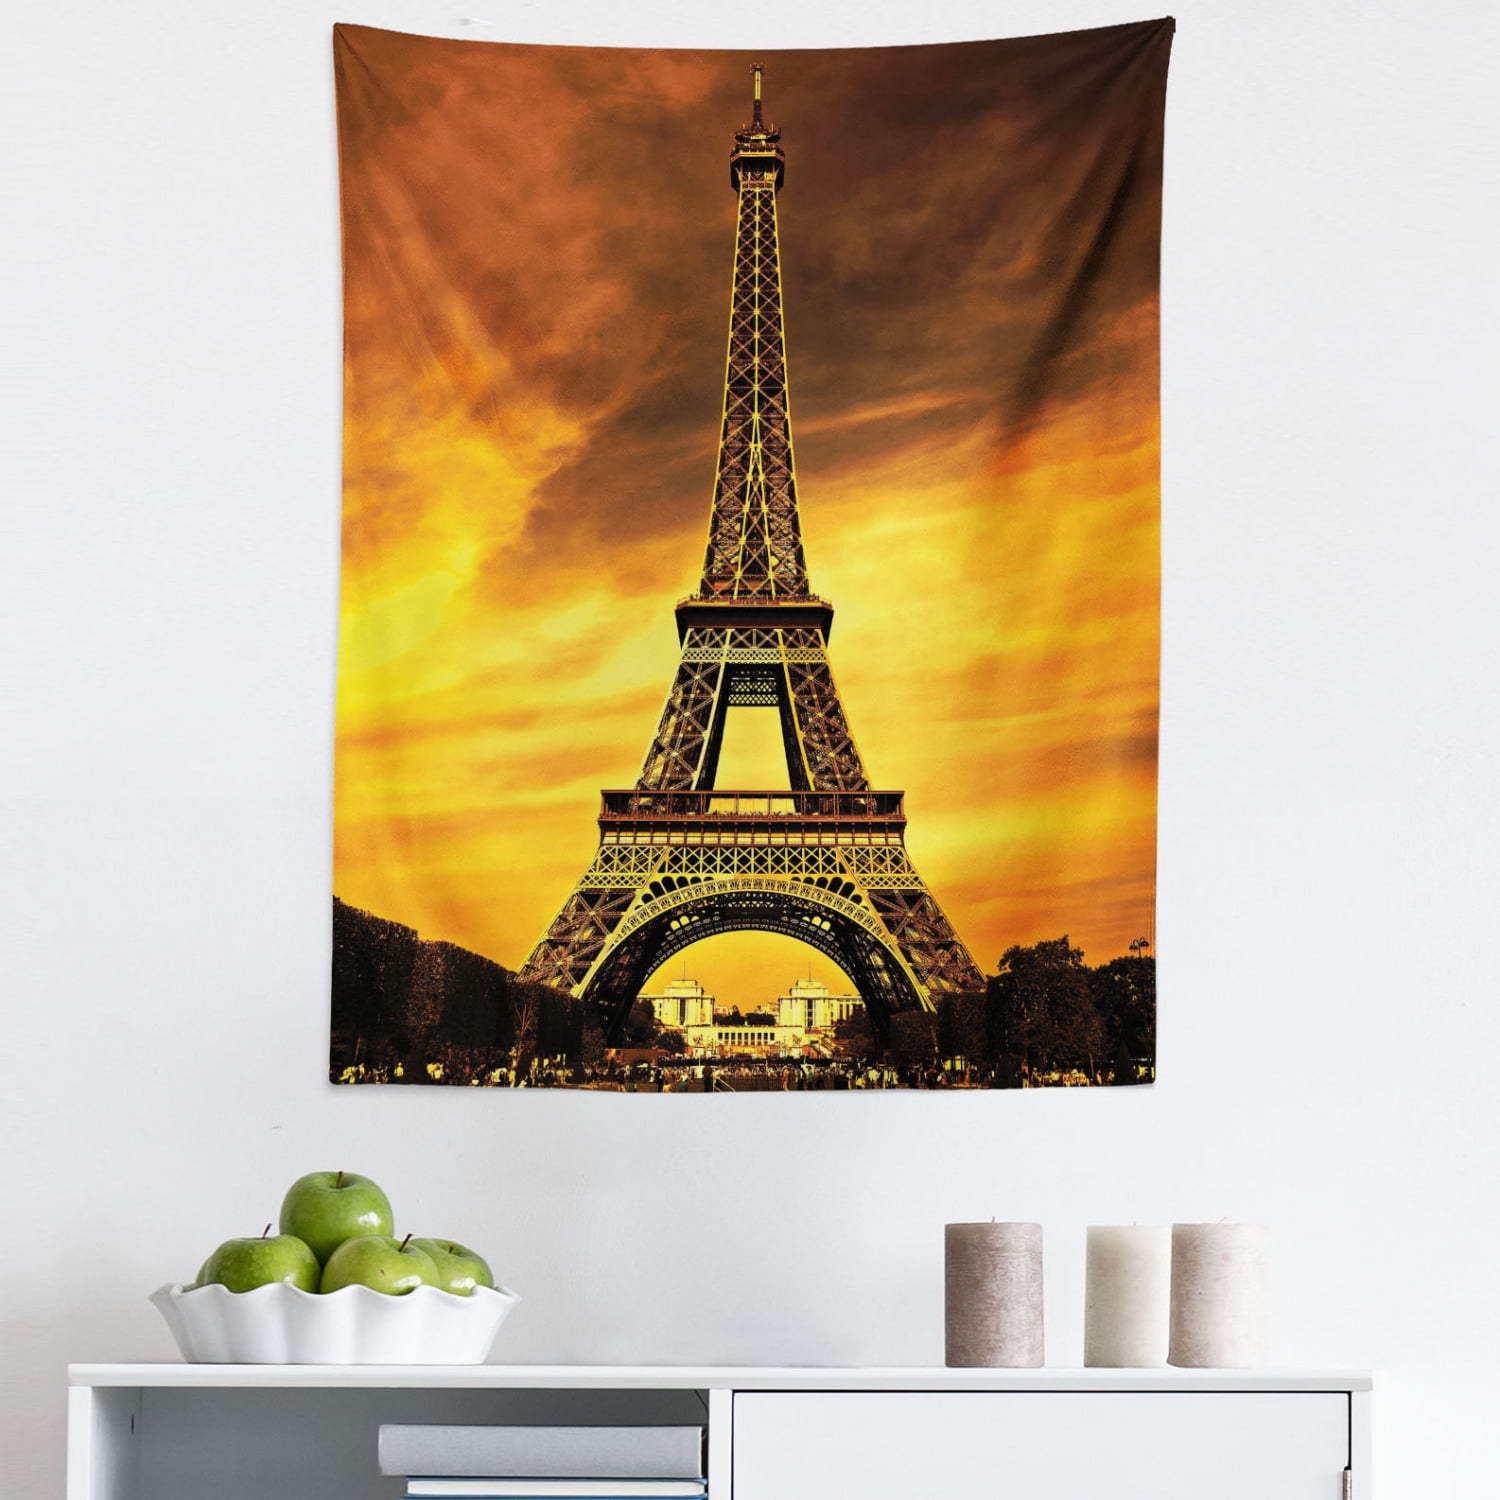 Polyester Tapestry Wall Hanging Paris Eiffel Tower Love Home Blanket Dorm Decor 